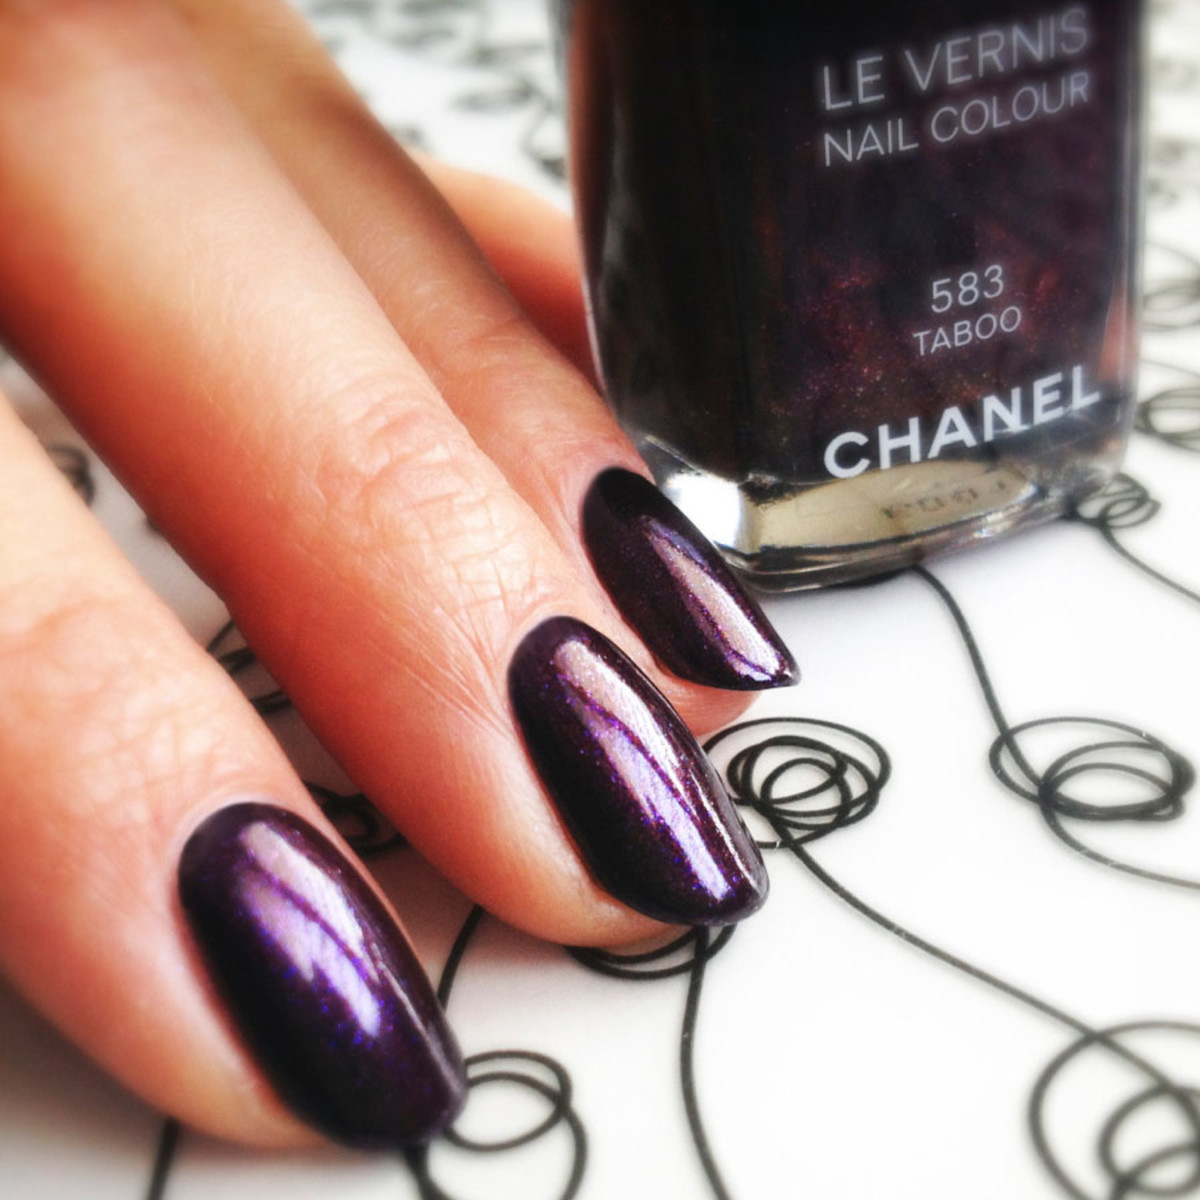 Chanel Taboo Swatch